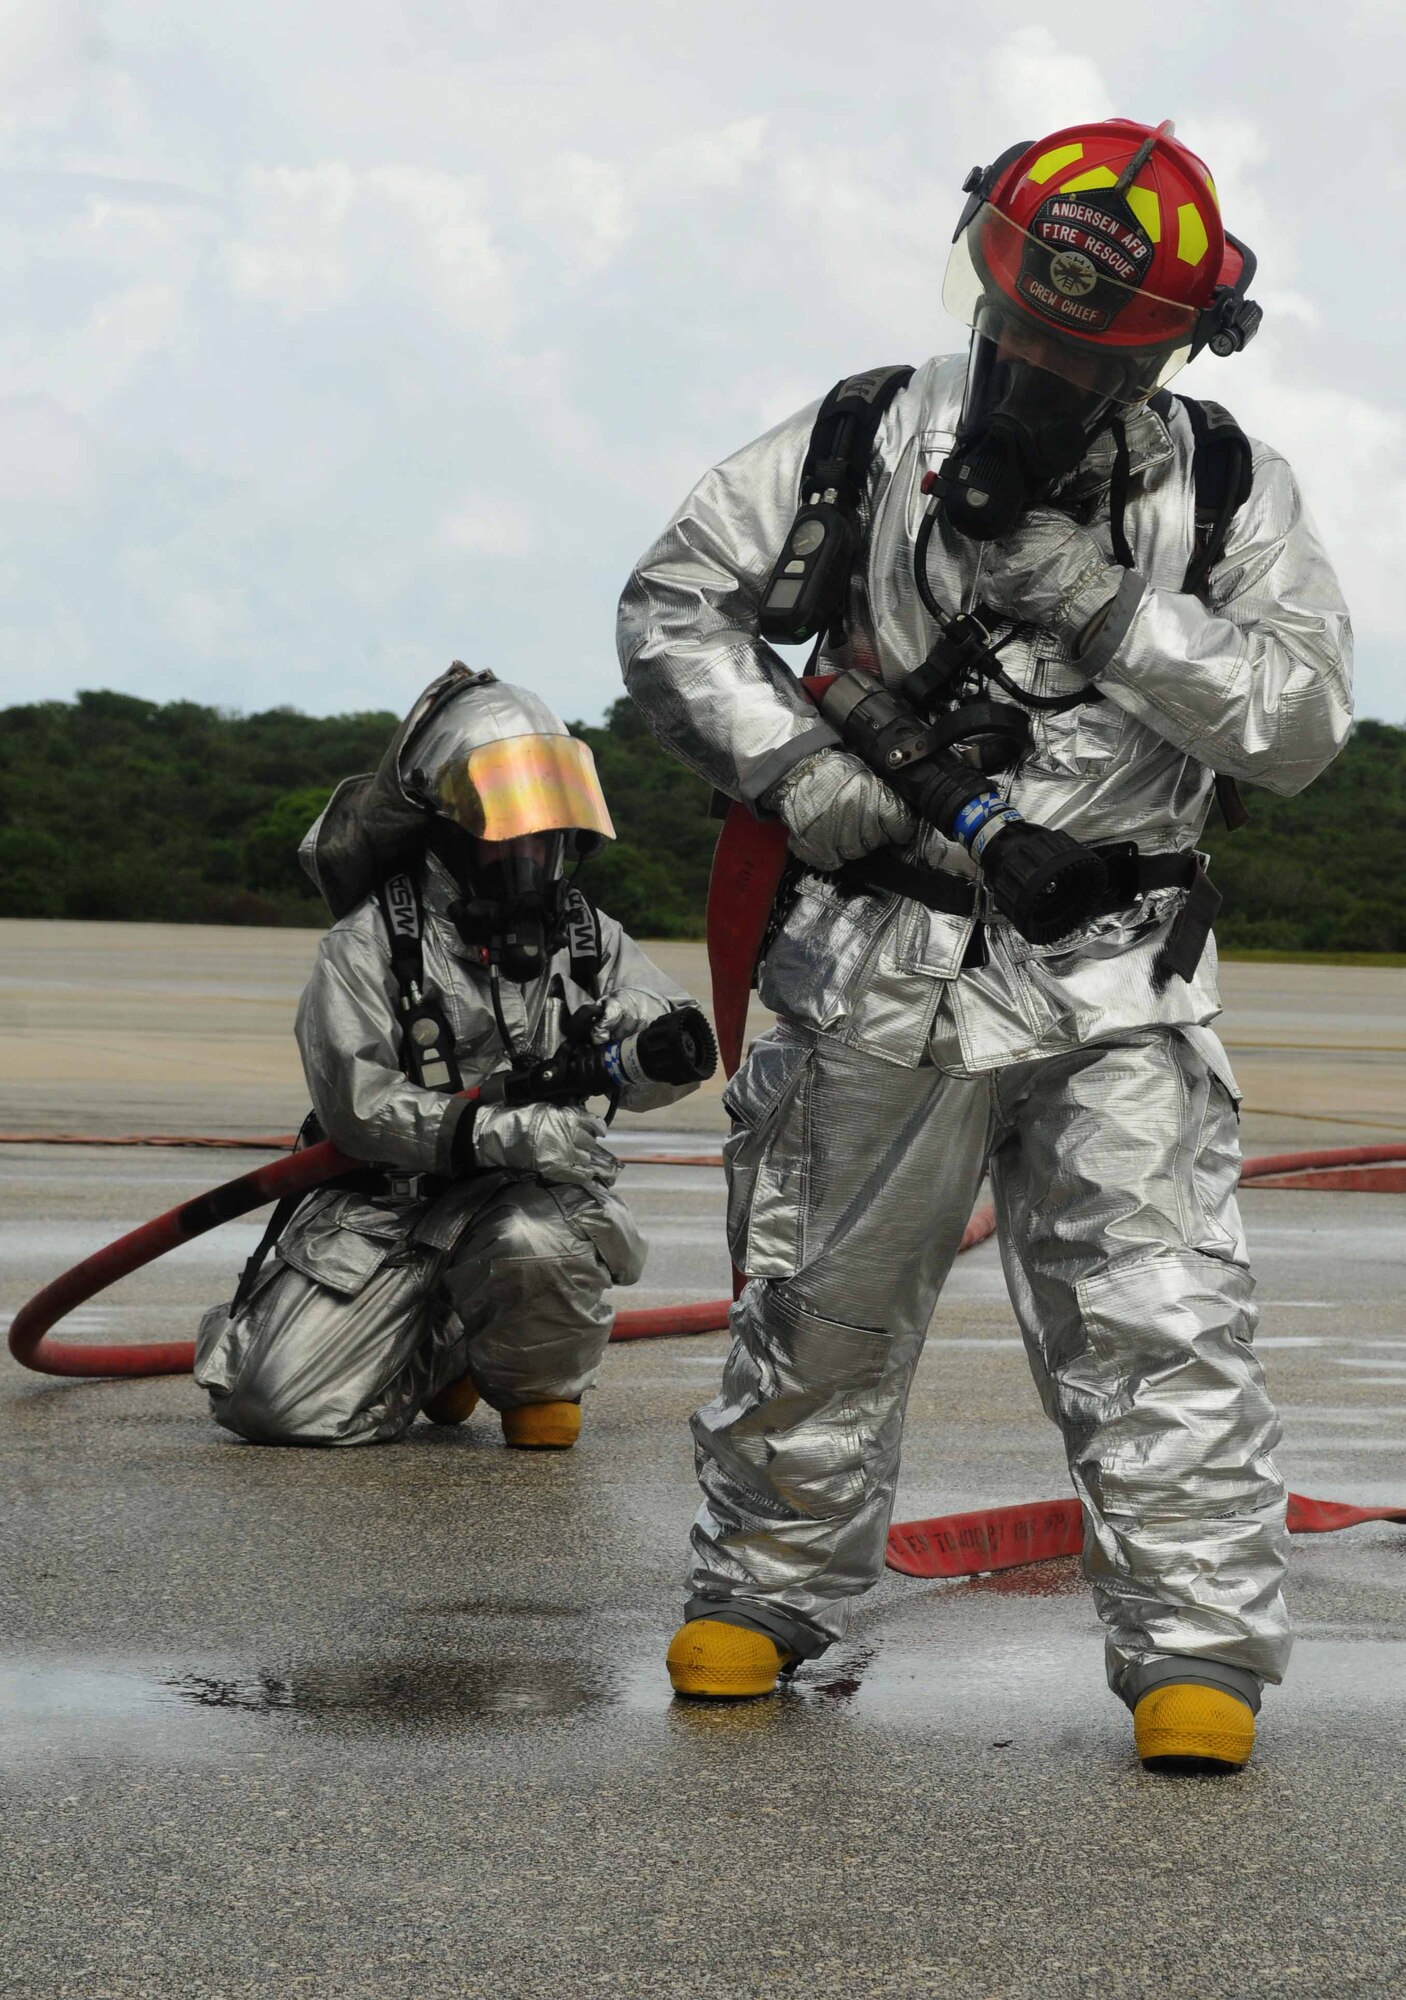 ANDERSEN AIR FORCE BASE, Guam - Members of the 36th Civil Engineer Squadron conduct aircraft firefighting training here June 23. The training is required quarterly and is conducted on the flightline. (Air Force photo by Airman Whitney Amstutz)